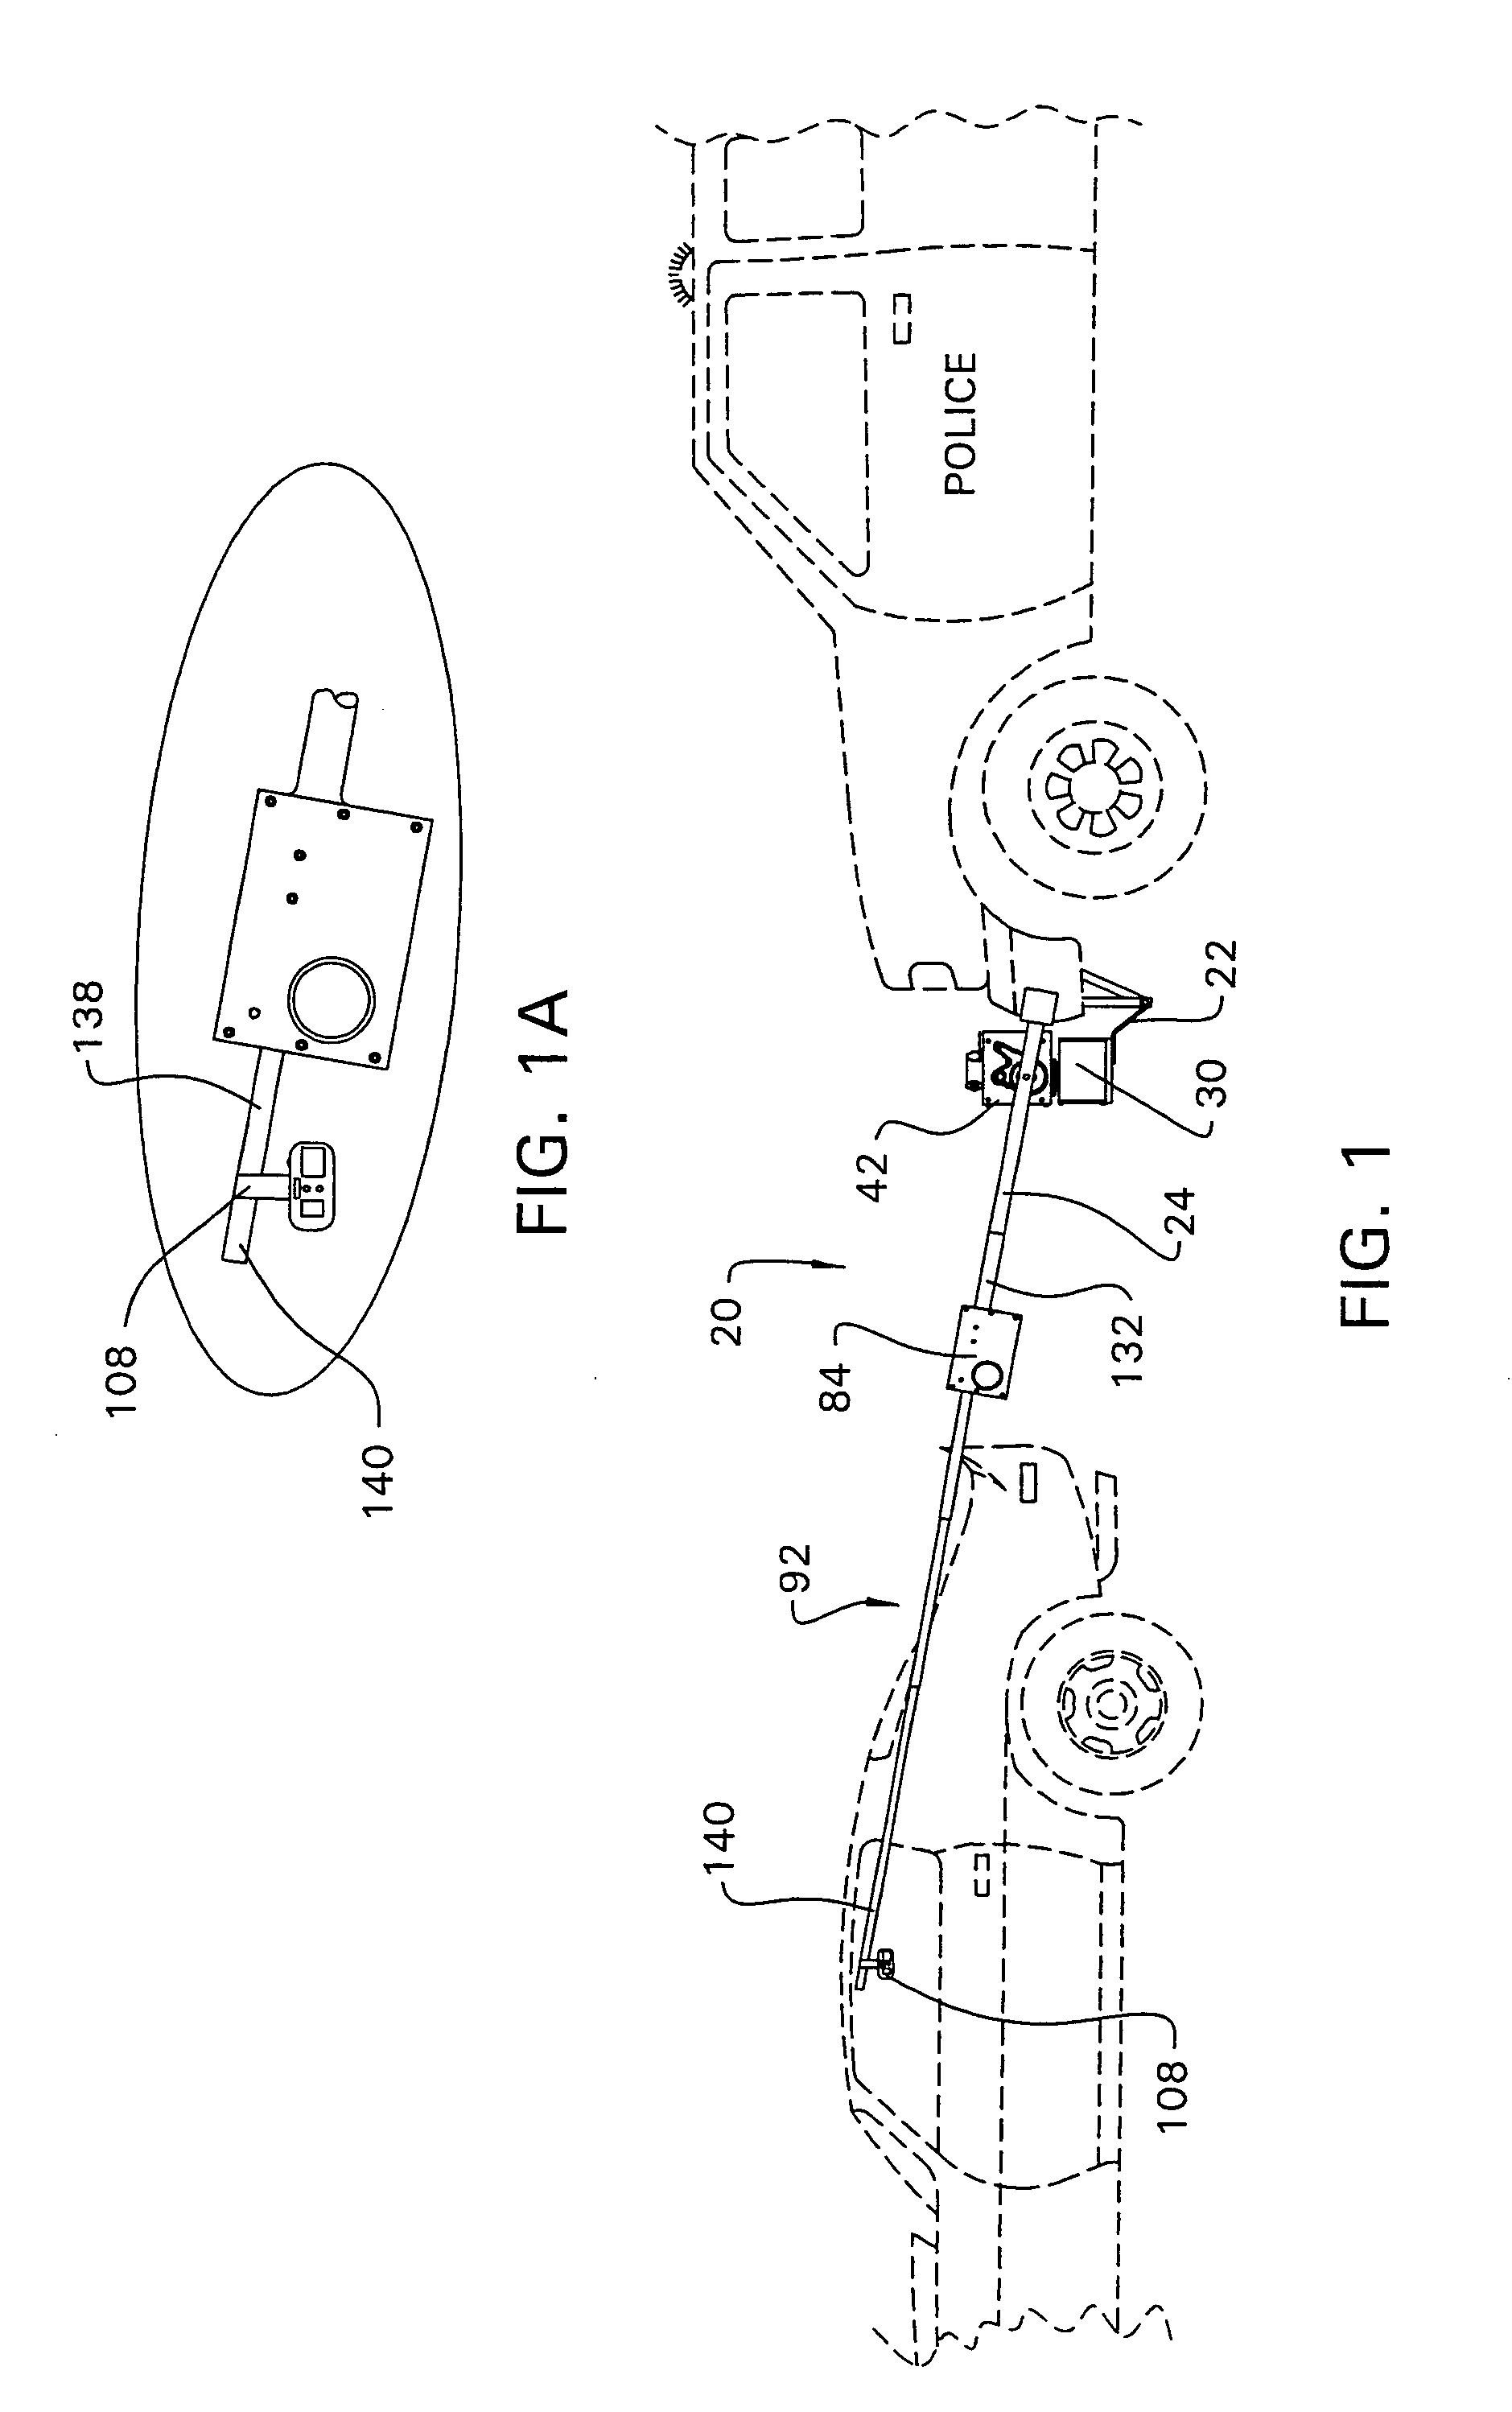 Extendable arm for a motor vehicle